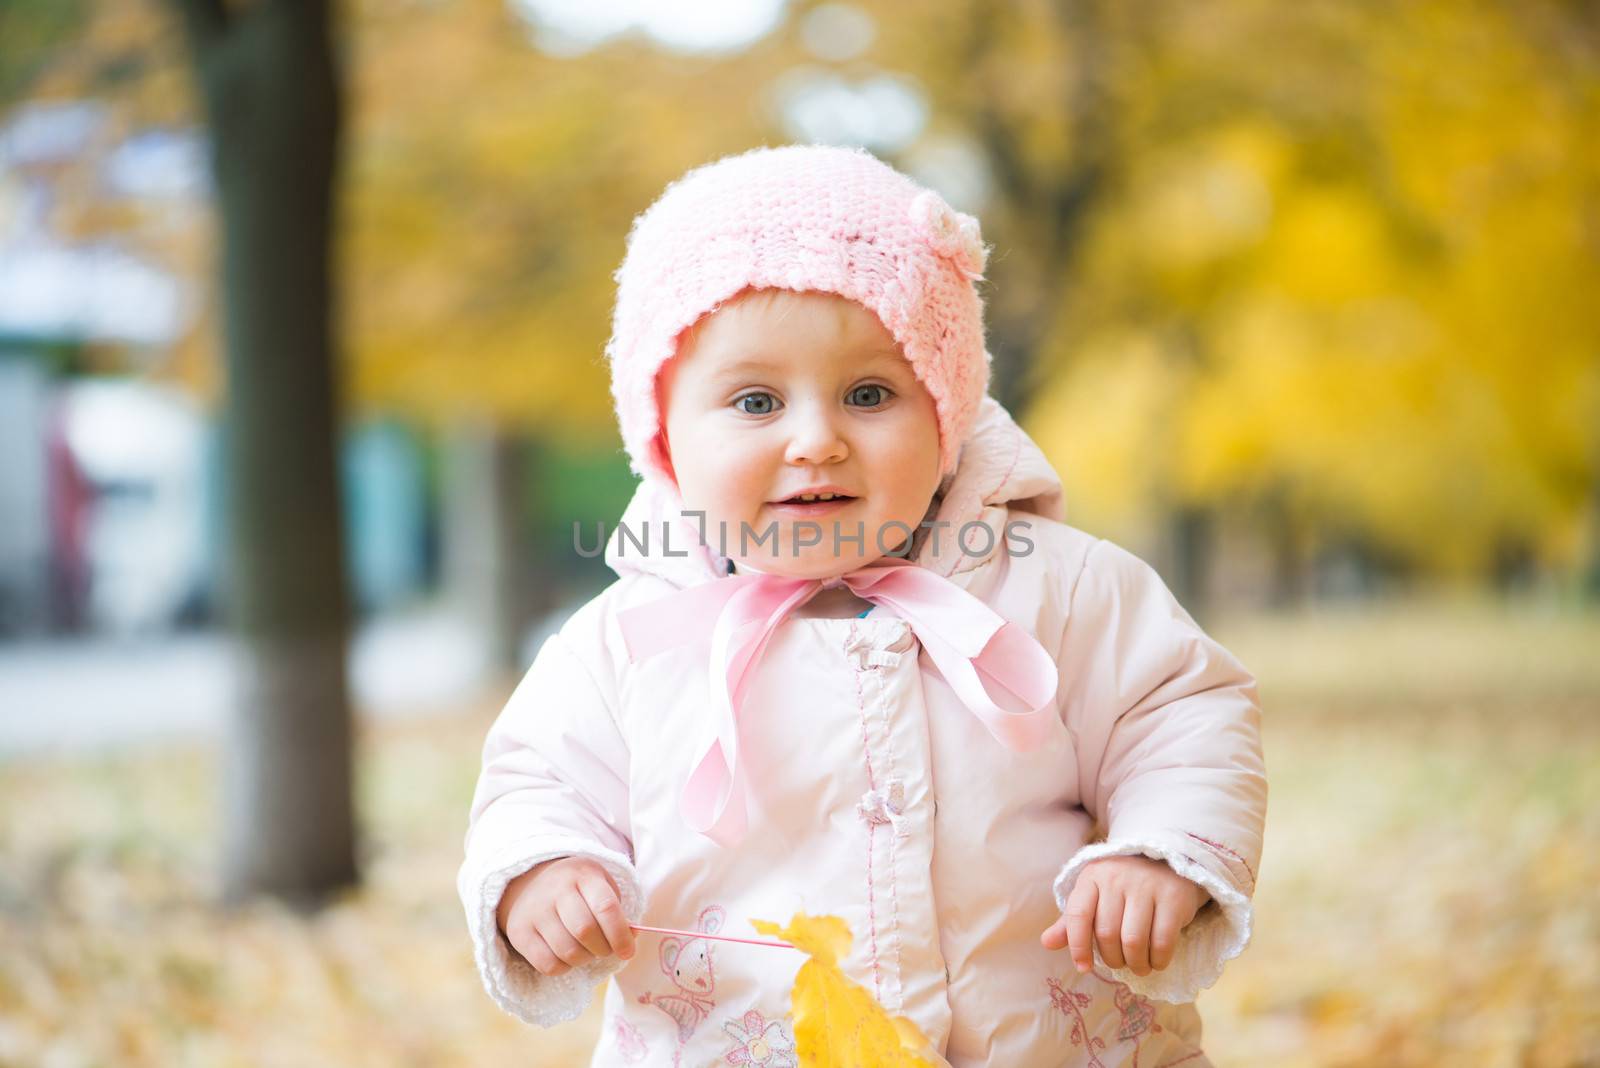 smiling little baby in the park with autumn leaves